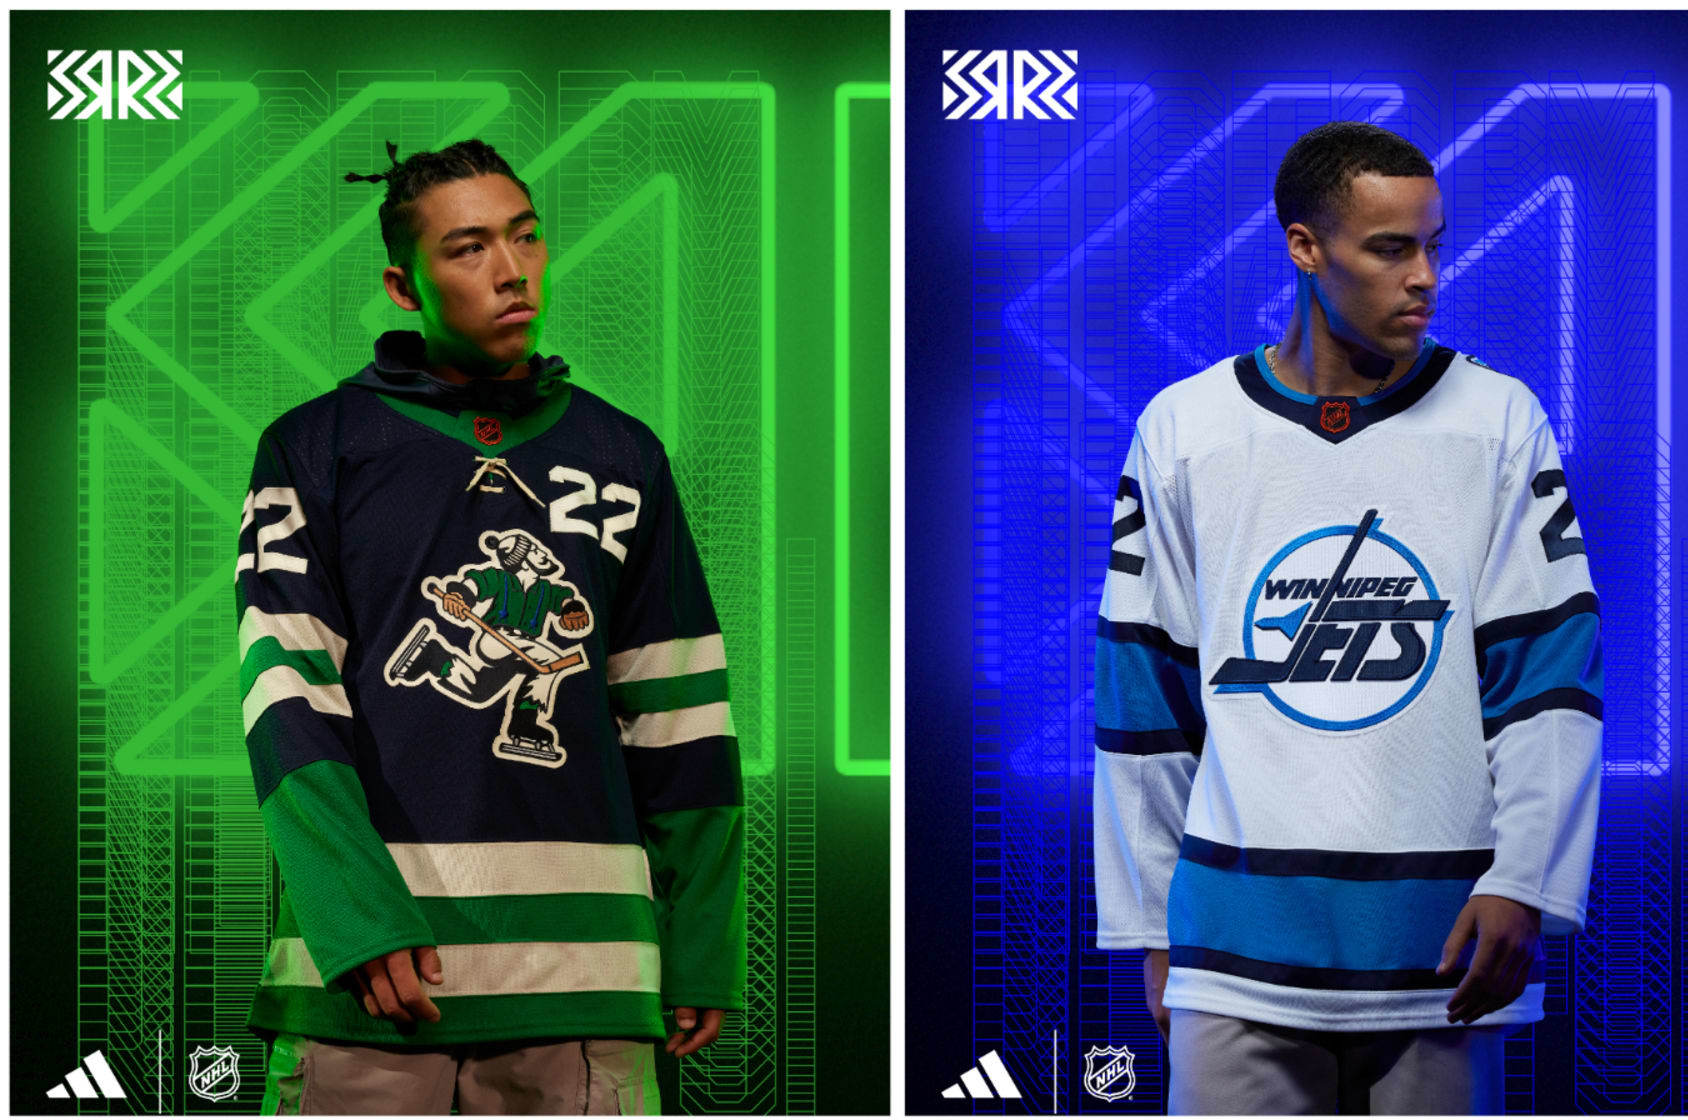 nhl jersey outfit